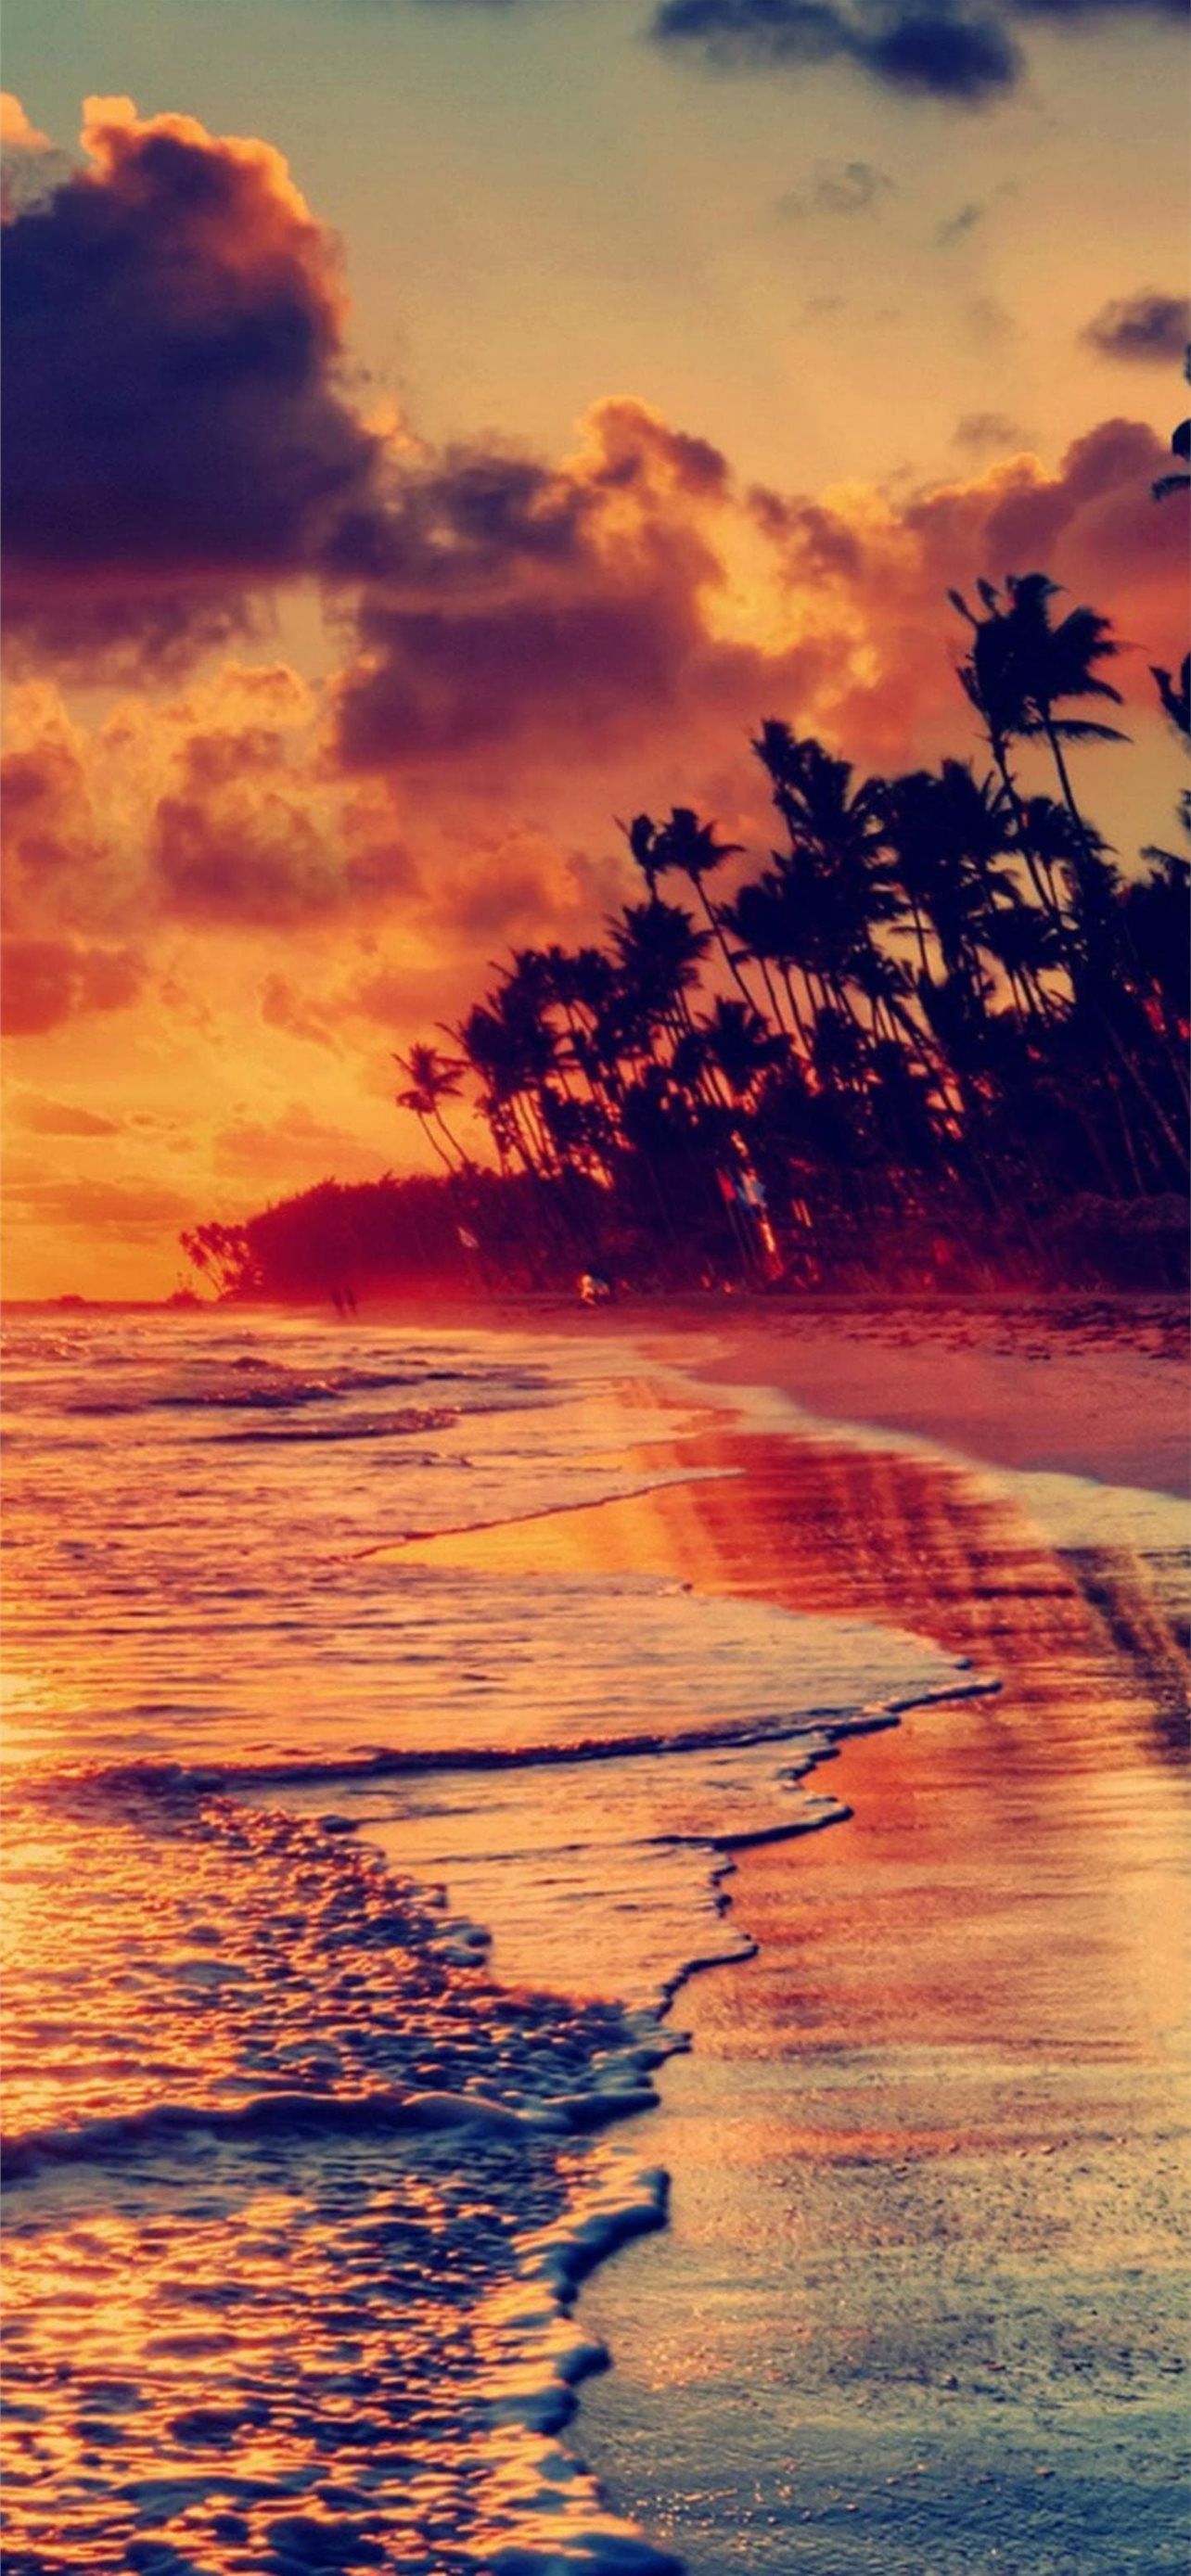 A sunset on the beach with palm trees - Beach, HD, landscape